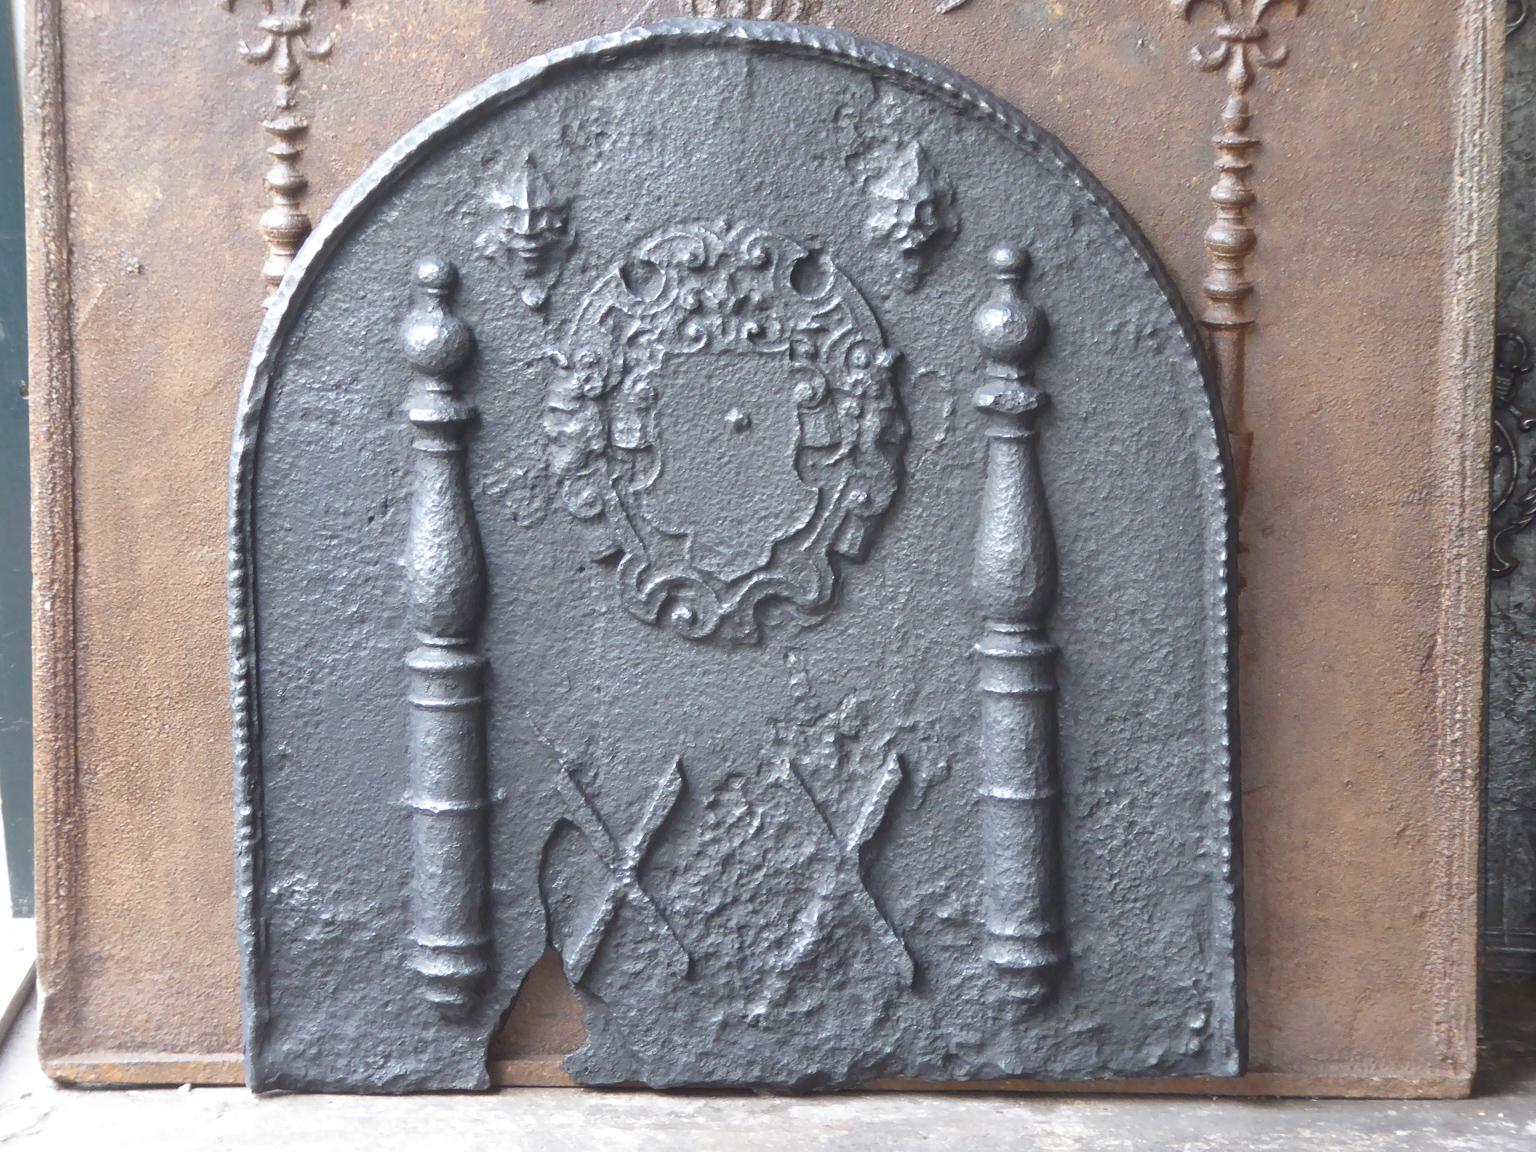 17th century French Louis XIII fireback with a coat of arms and two pillars of Hercules. The pillars refer to the club of Hercules and symbolize strength. The fireback is made of cast iron and has a black patina. 

This product weighs more than 65